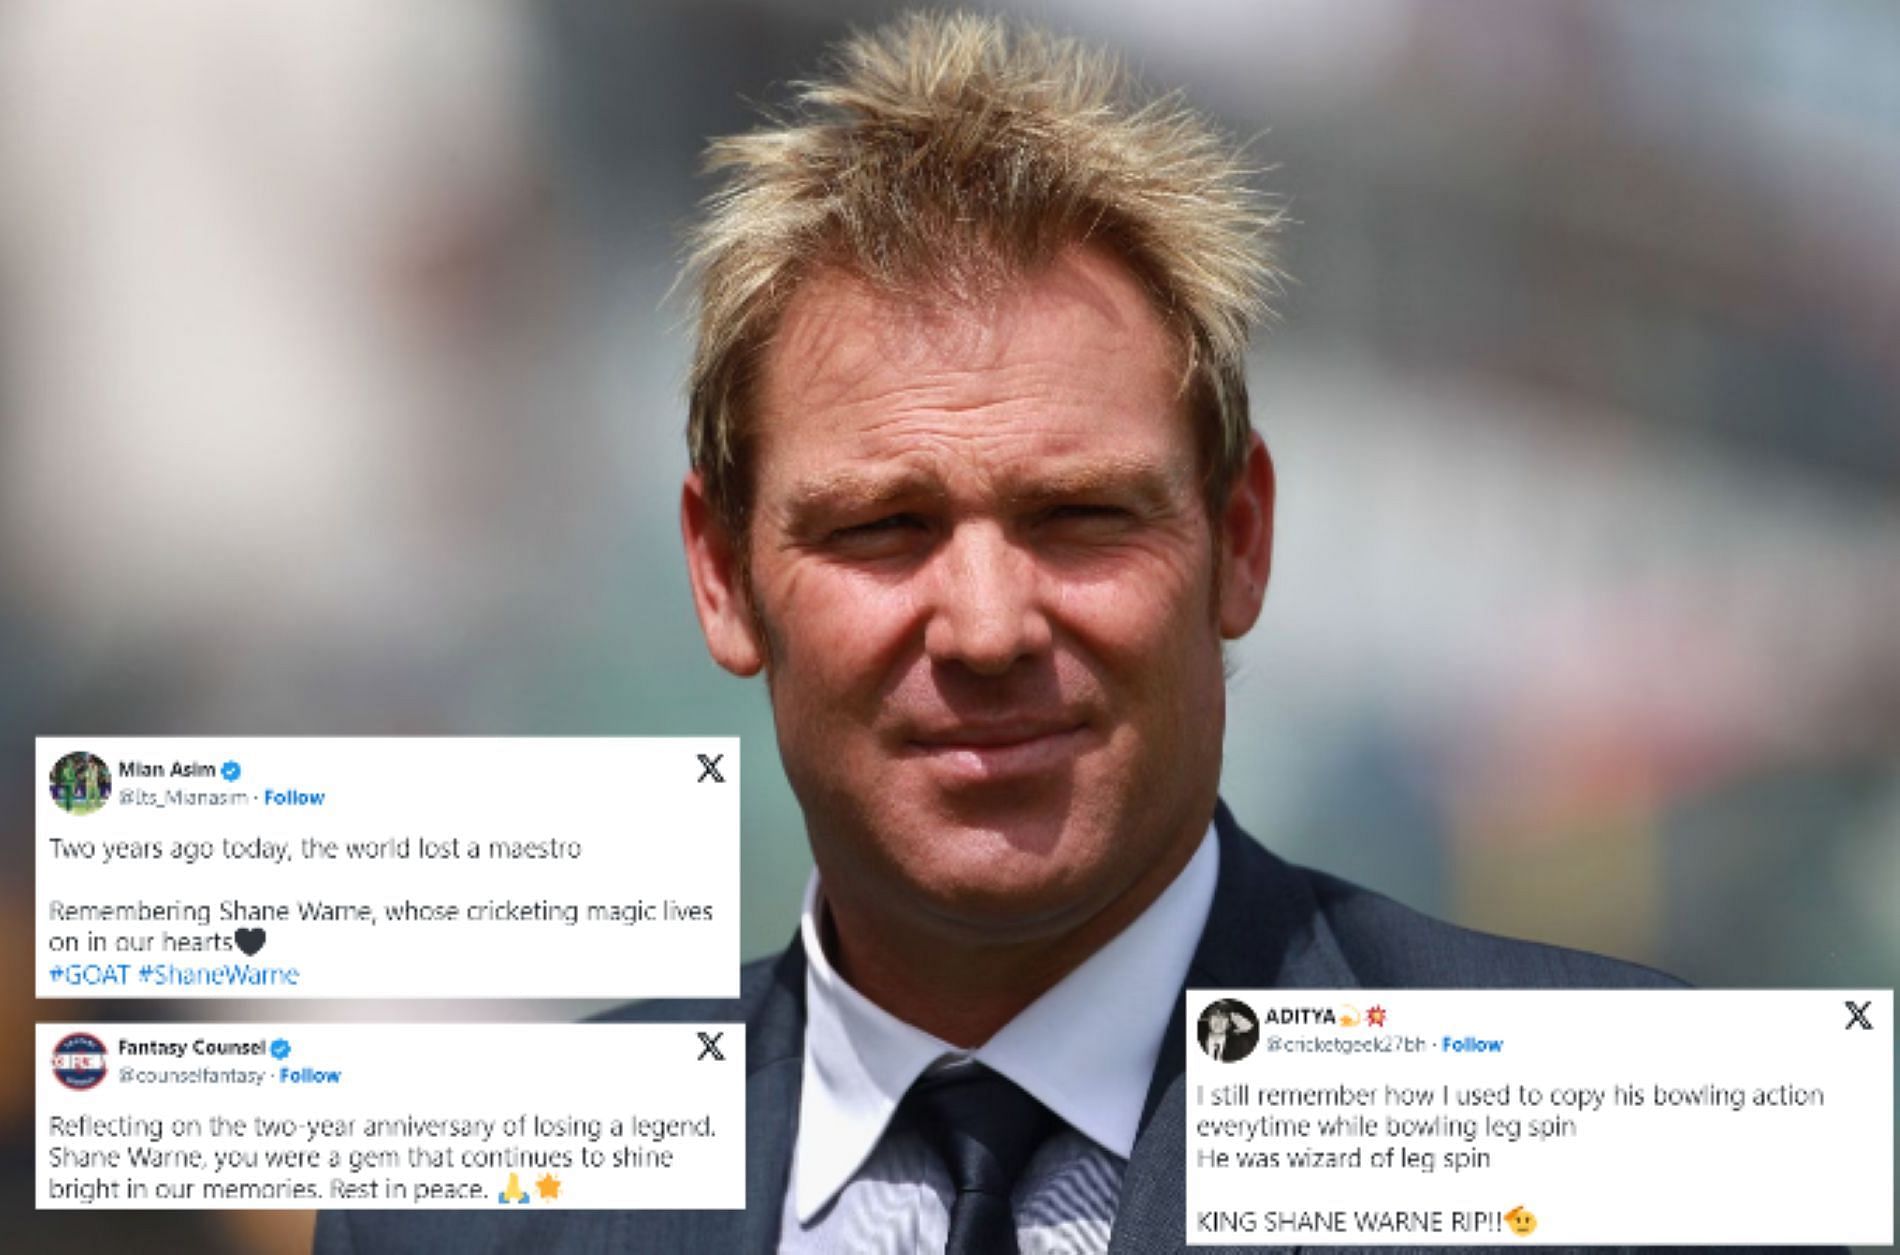 Warne enthralled fans with his magical leg-spin bowling in the 1990s and 2000s